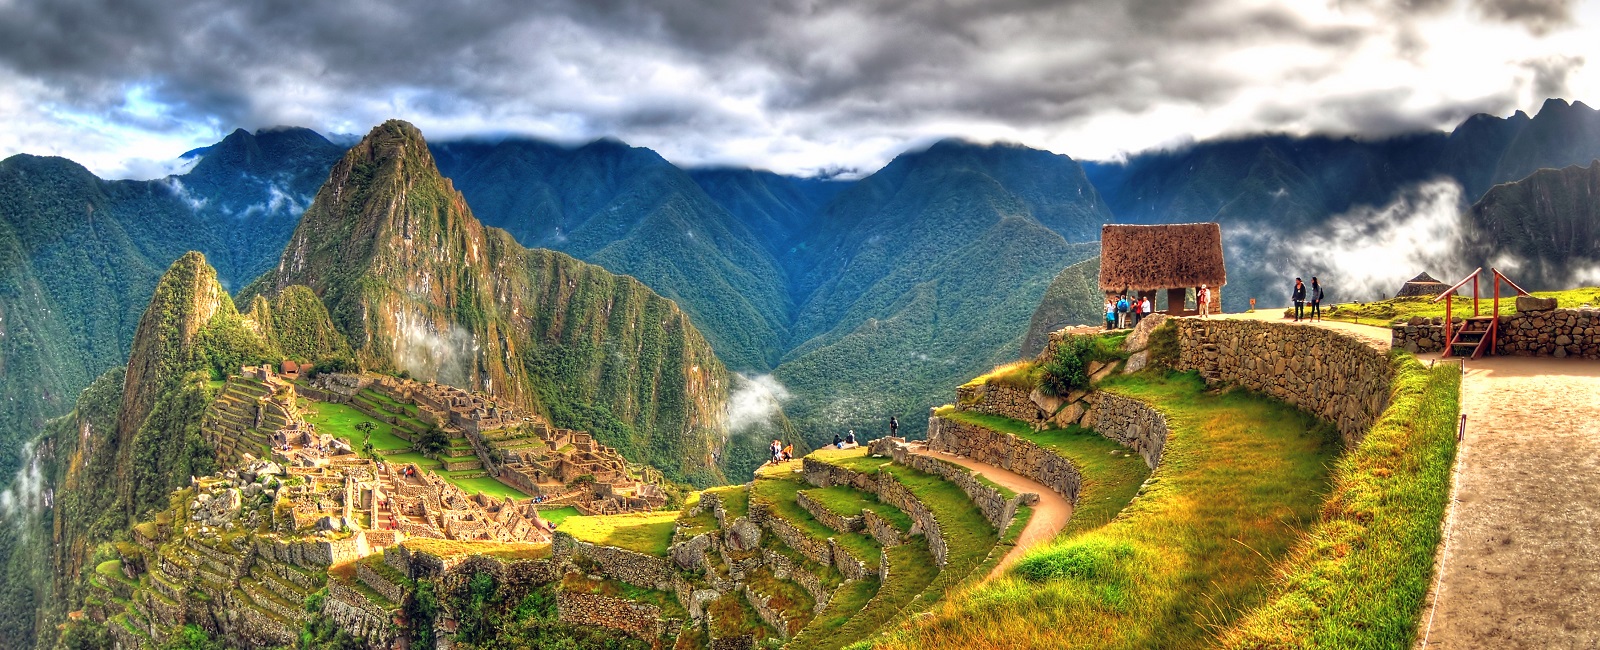 Enchanting-Travels-Peru-Tours-Panoramic-HDR-image-of-Machu-Picchu-the-lost-city-of-the-Incas-on-a-cloudy-day.-Machu-Picchu-is-one-of-the-new-7-Wonder-of-the-Word-near-Cusco